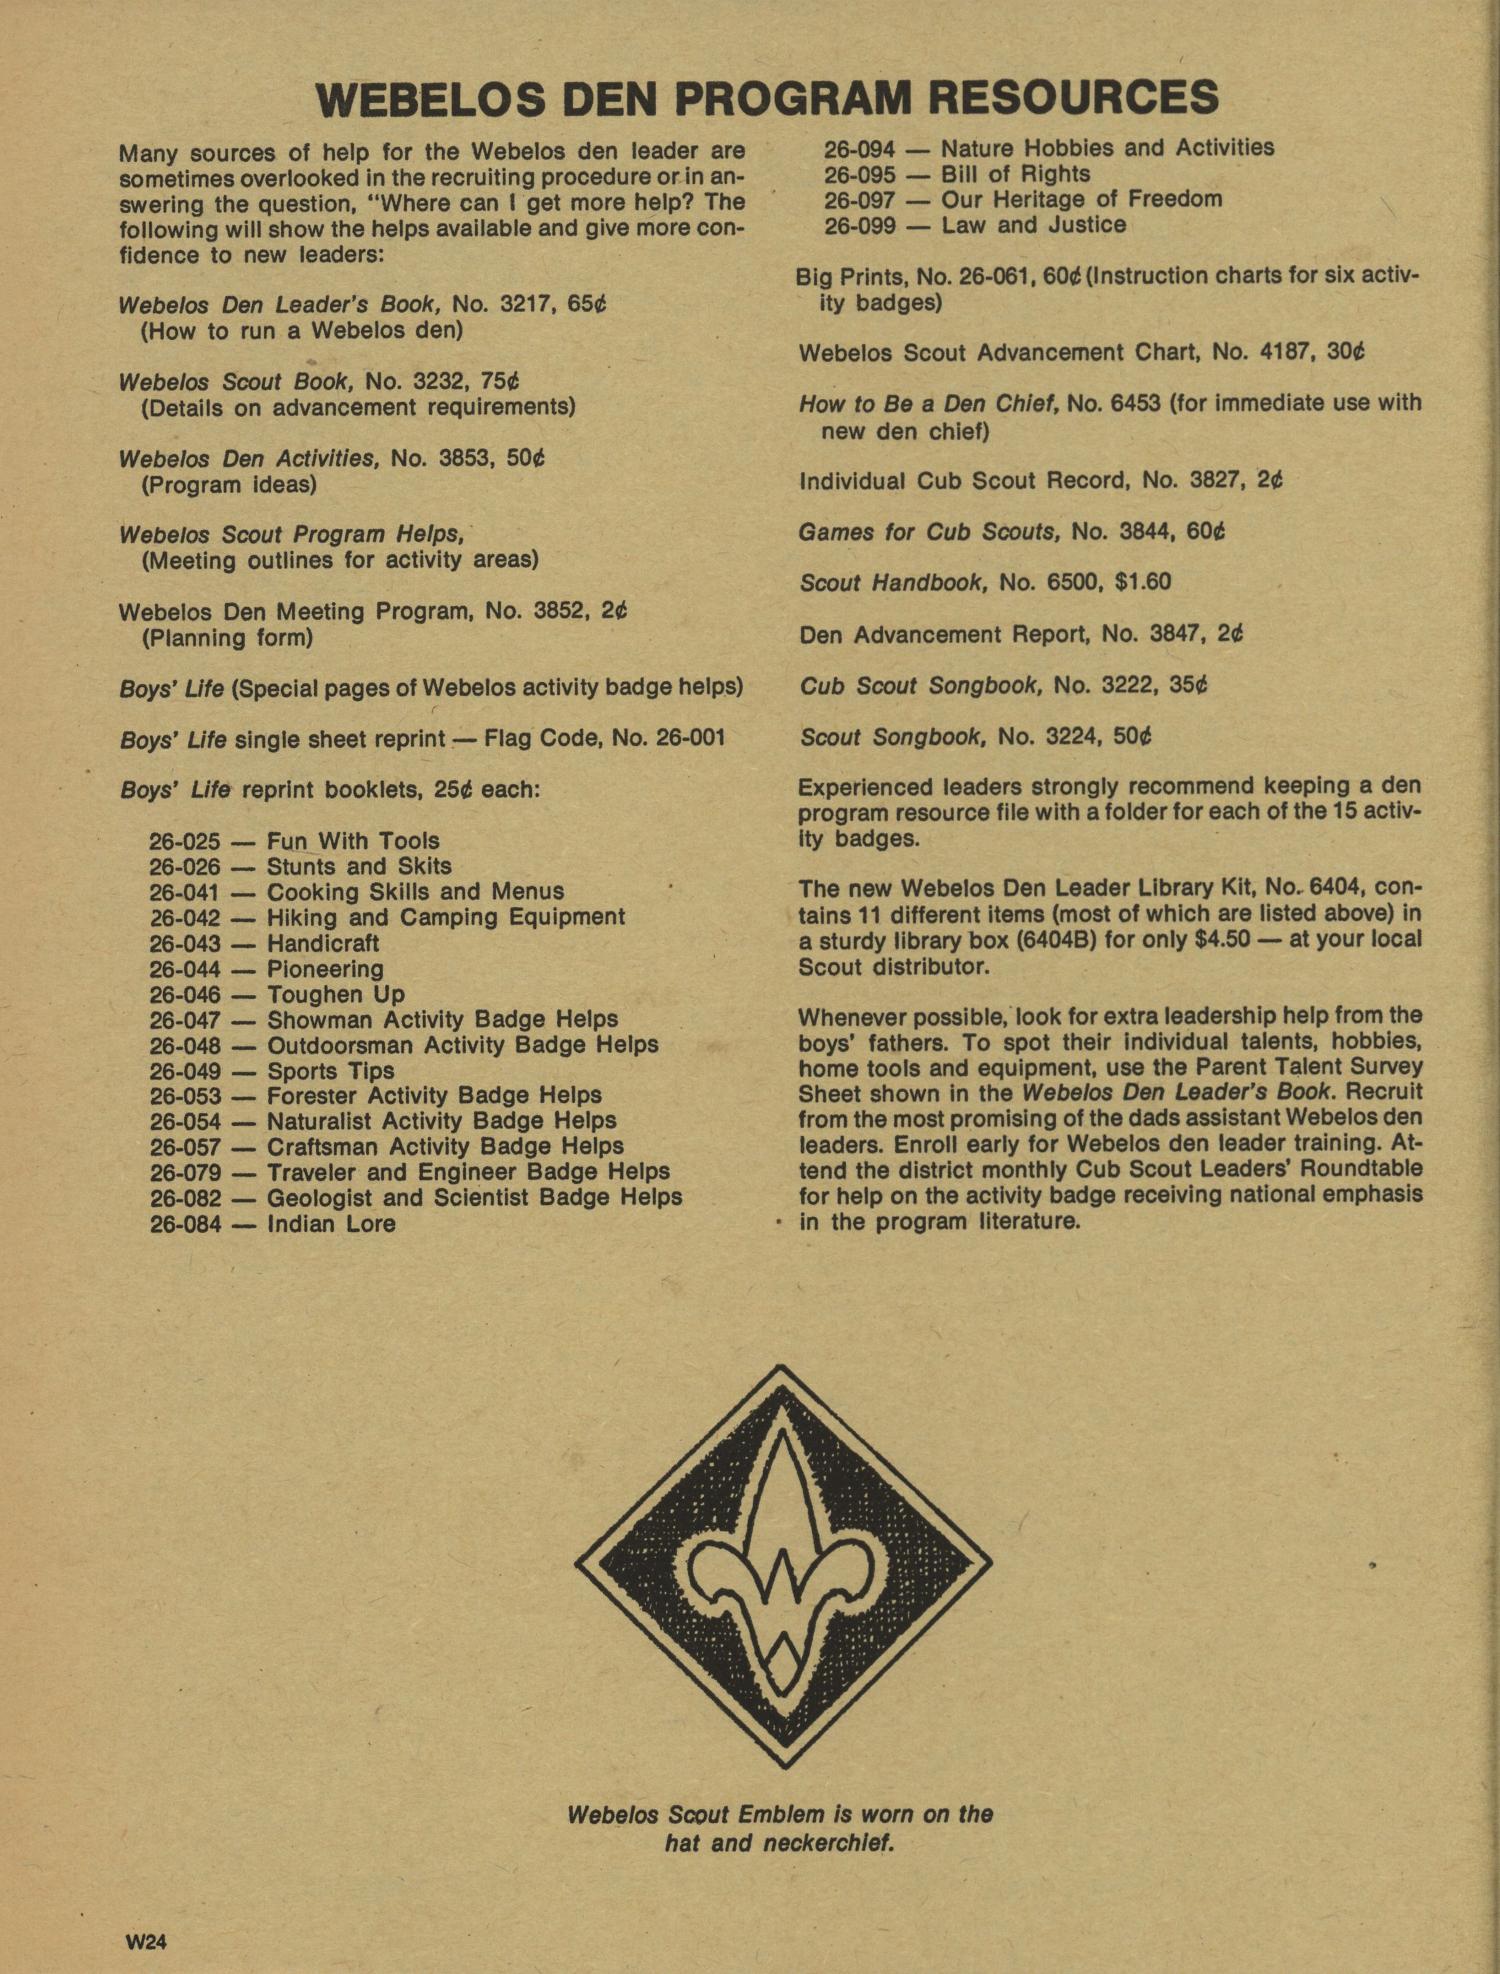 Scouting, Volume 62, Number 3, March-April 1974
                                                
                                                    24
                                                